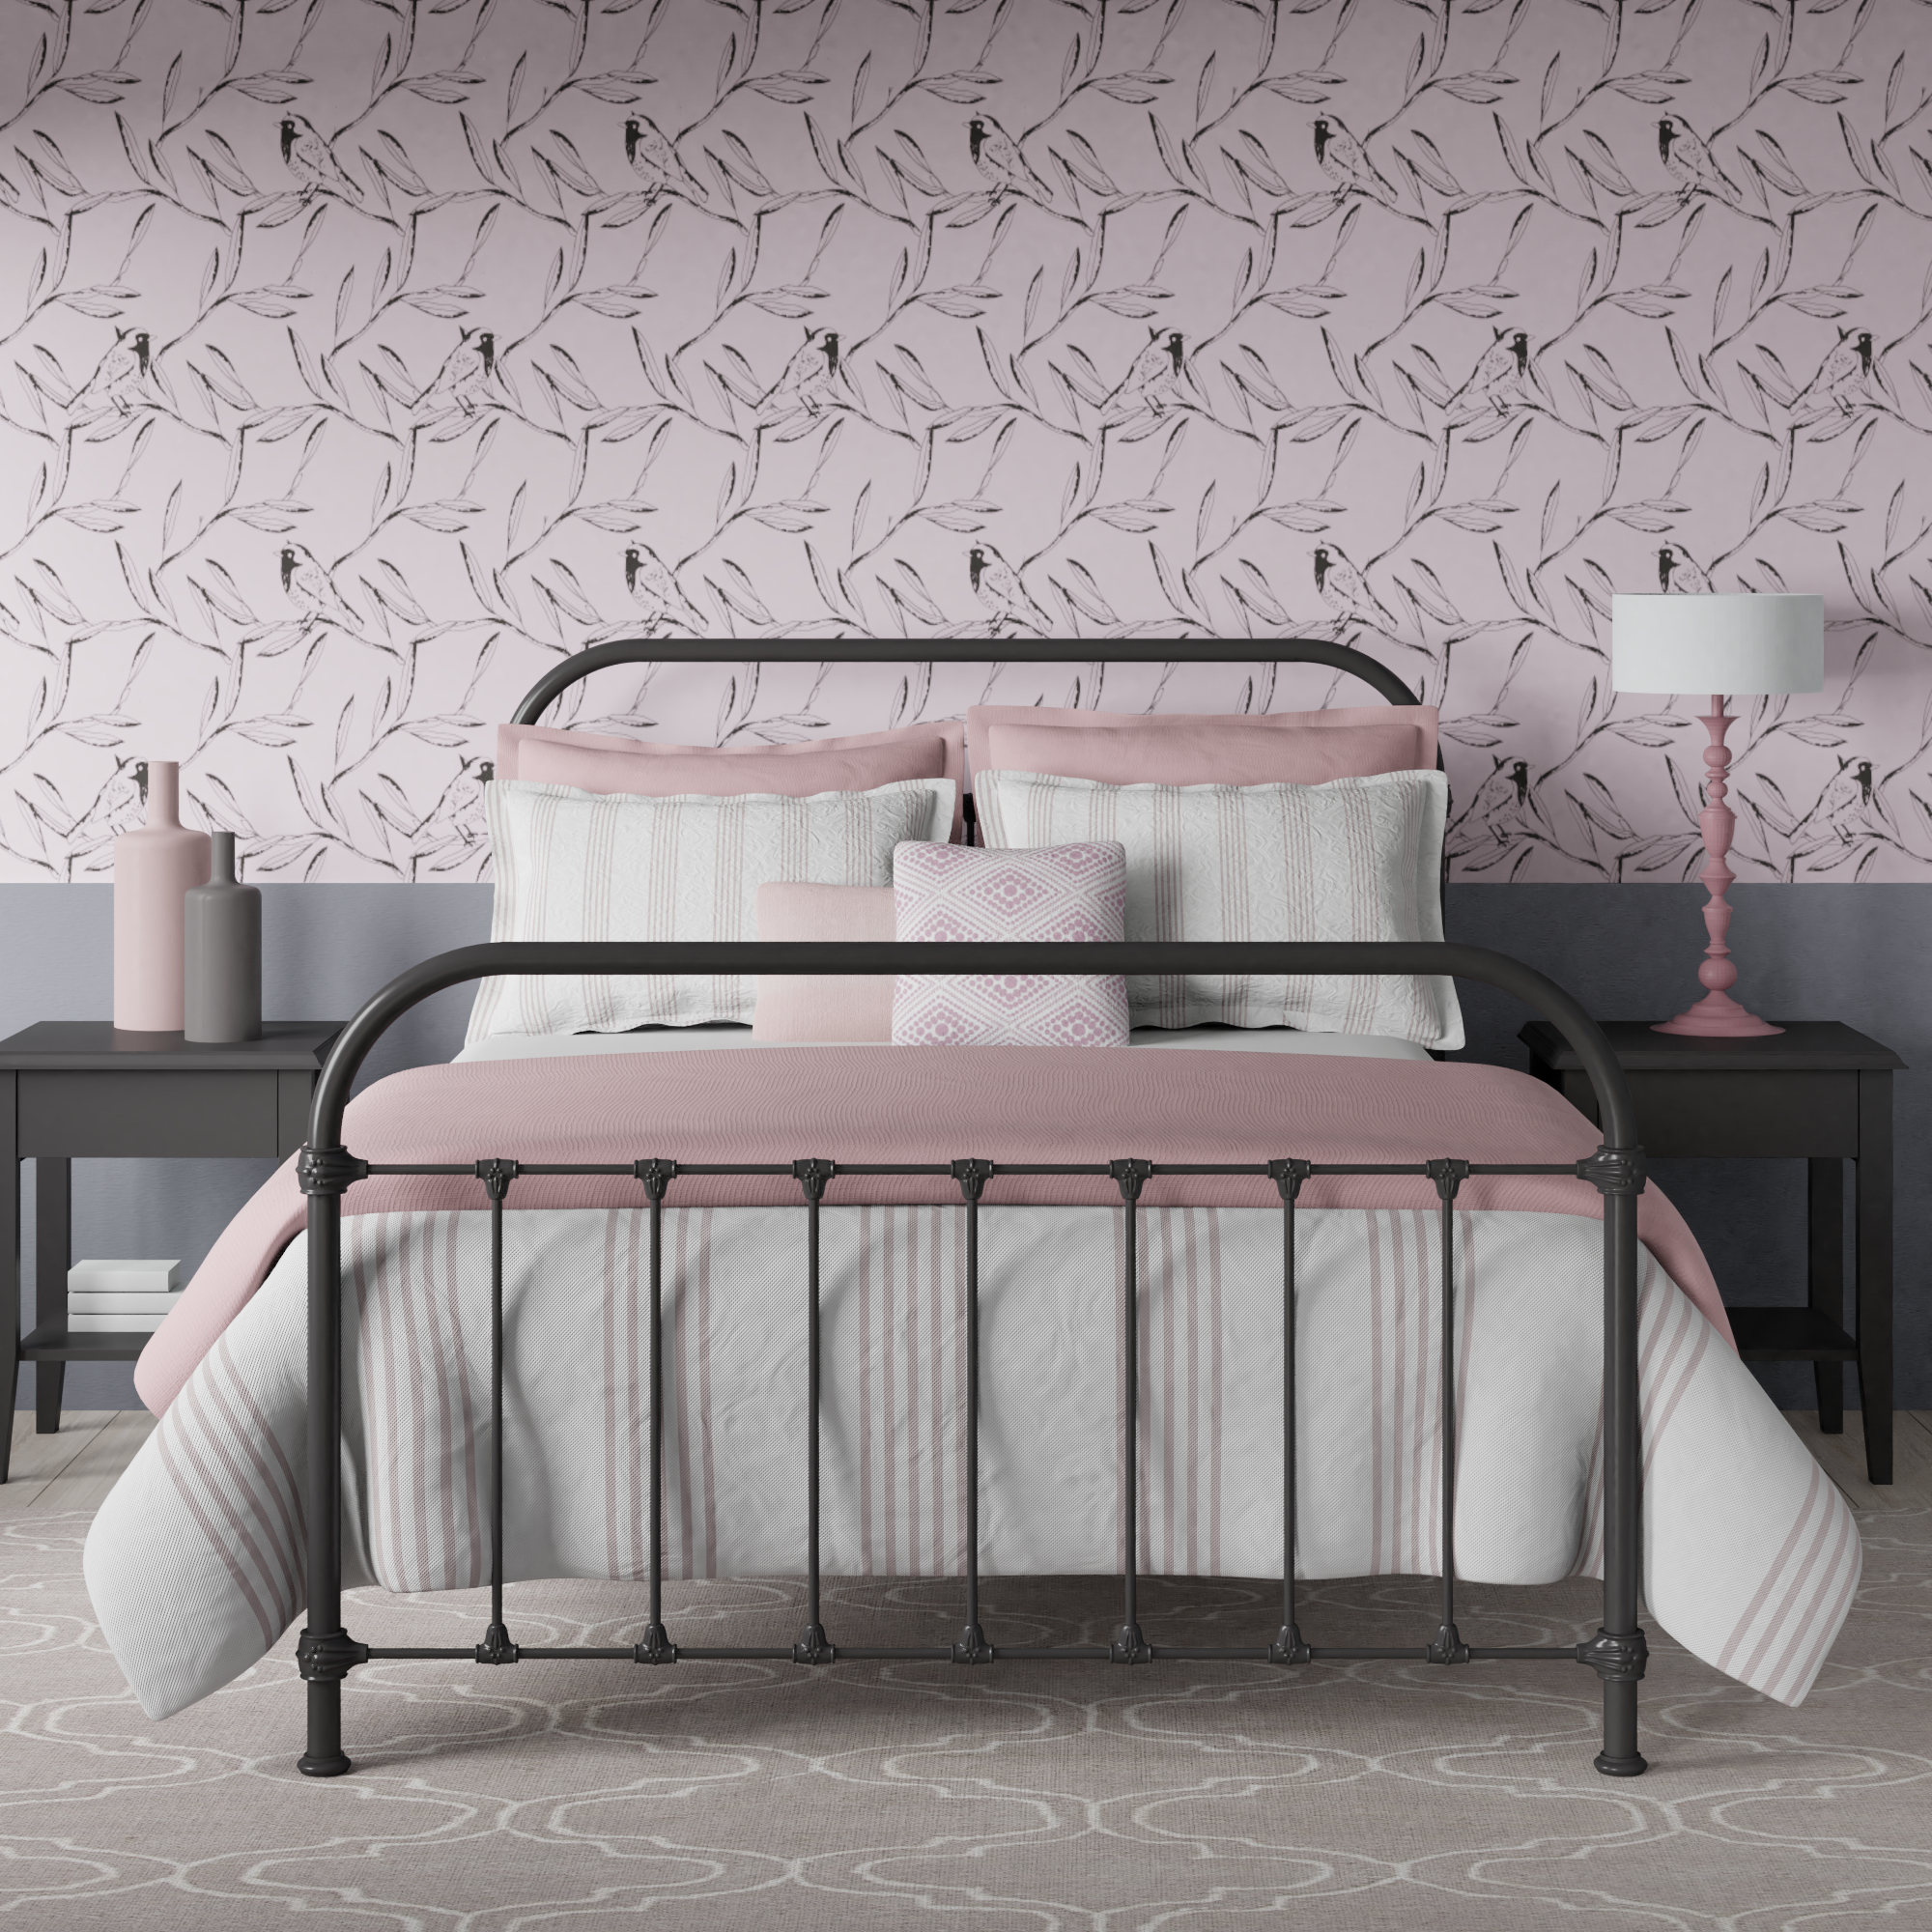 Small double beds by The Original Bed Co.